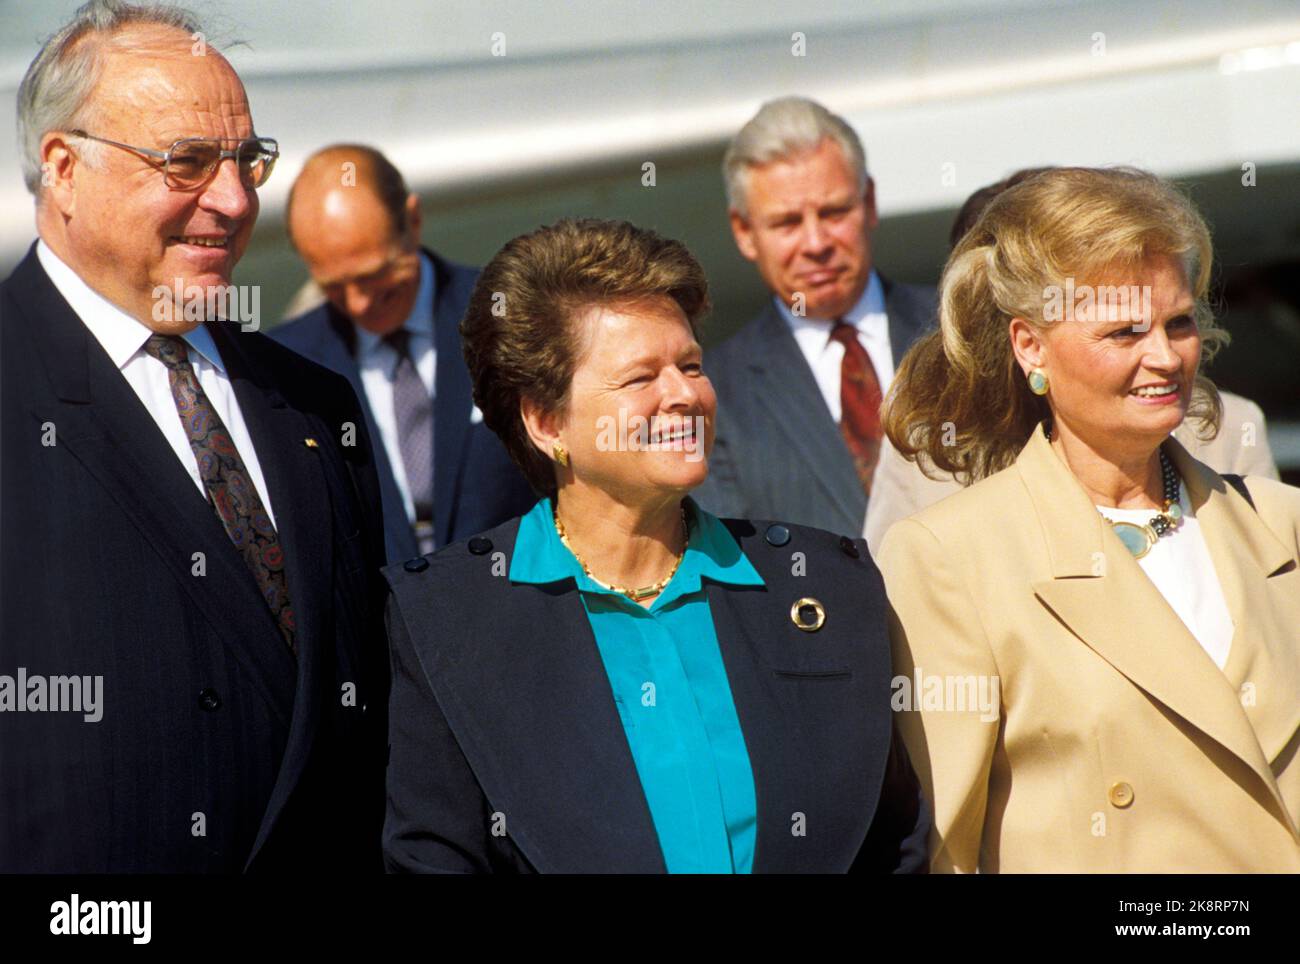 Oslo July 16, 1992. Germany's prime minister, Helmut Kohl with Mrs. Hannelore is welcomed by Prime Minister Gro Harlem Brundtland at Fornebu. The trip went directly to political talks in the Prime Minister's office, where the European issue was at the top of the agenda. Photo; Bjørn Sigurdsøn / NTB / NTB Stock Photo